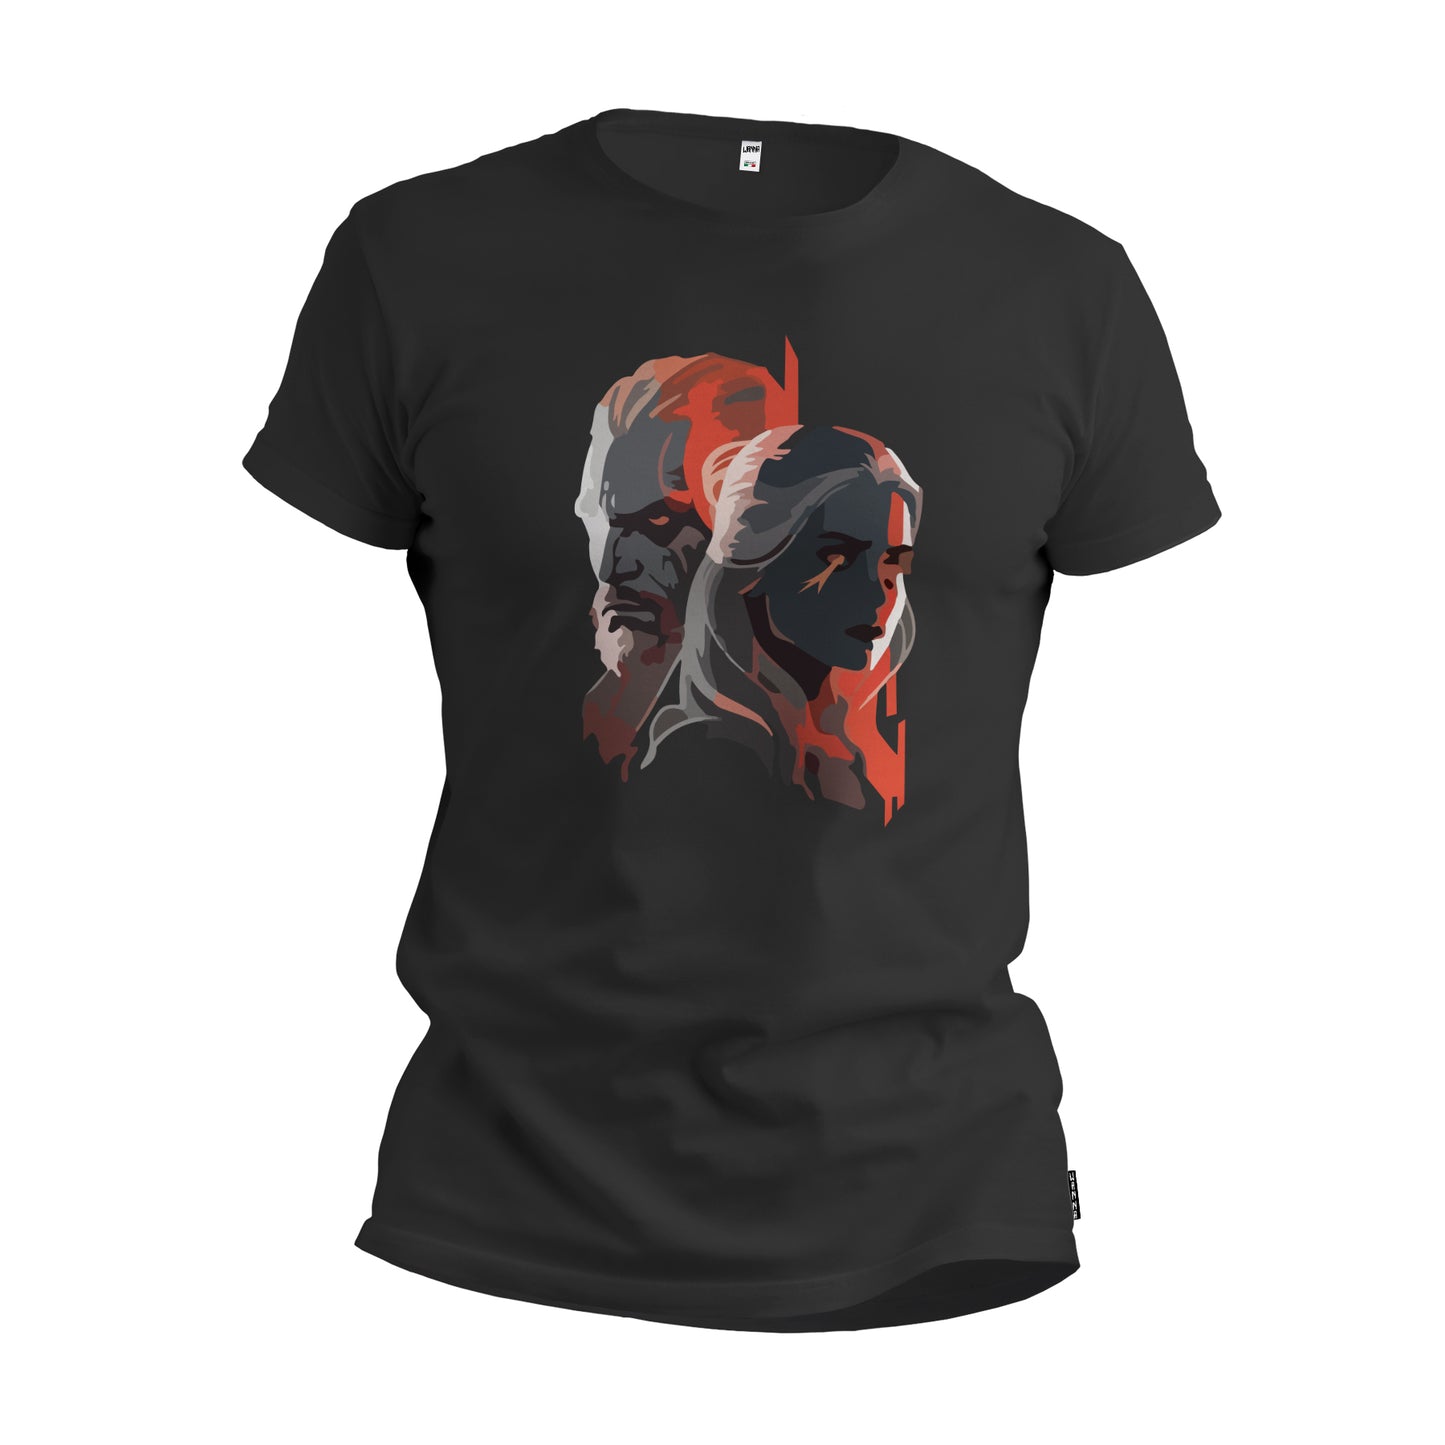 The Witcher- T-Shirt